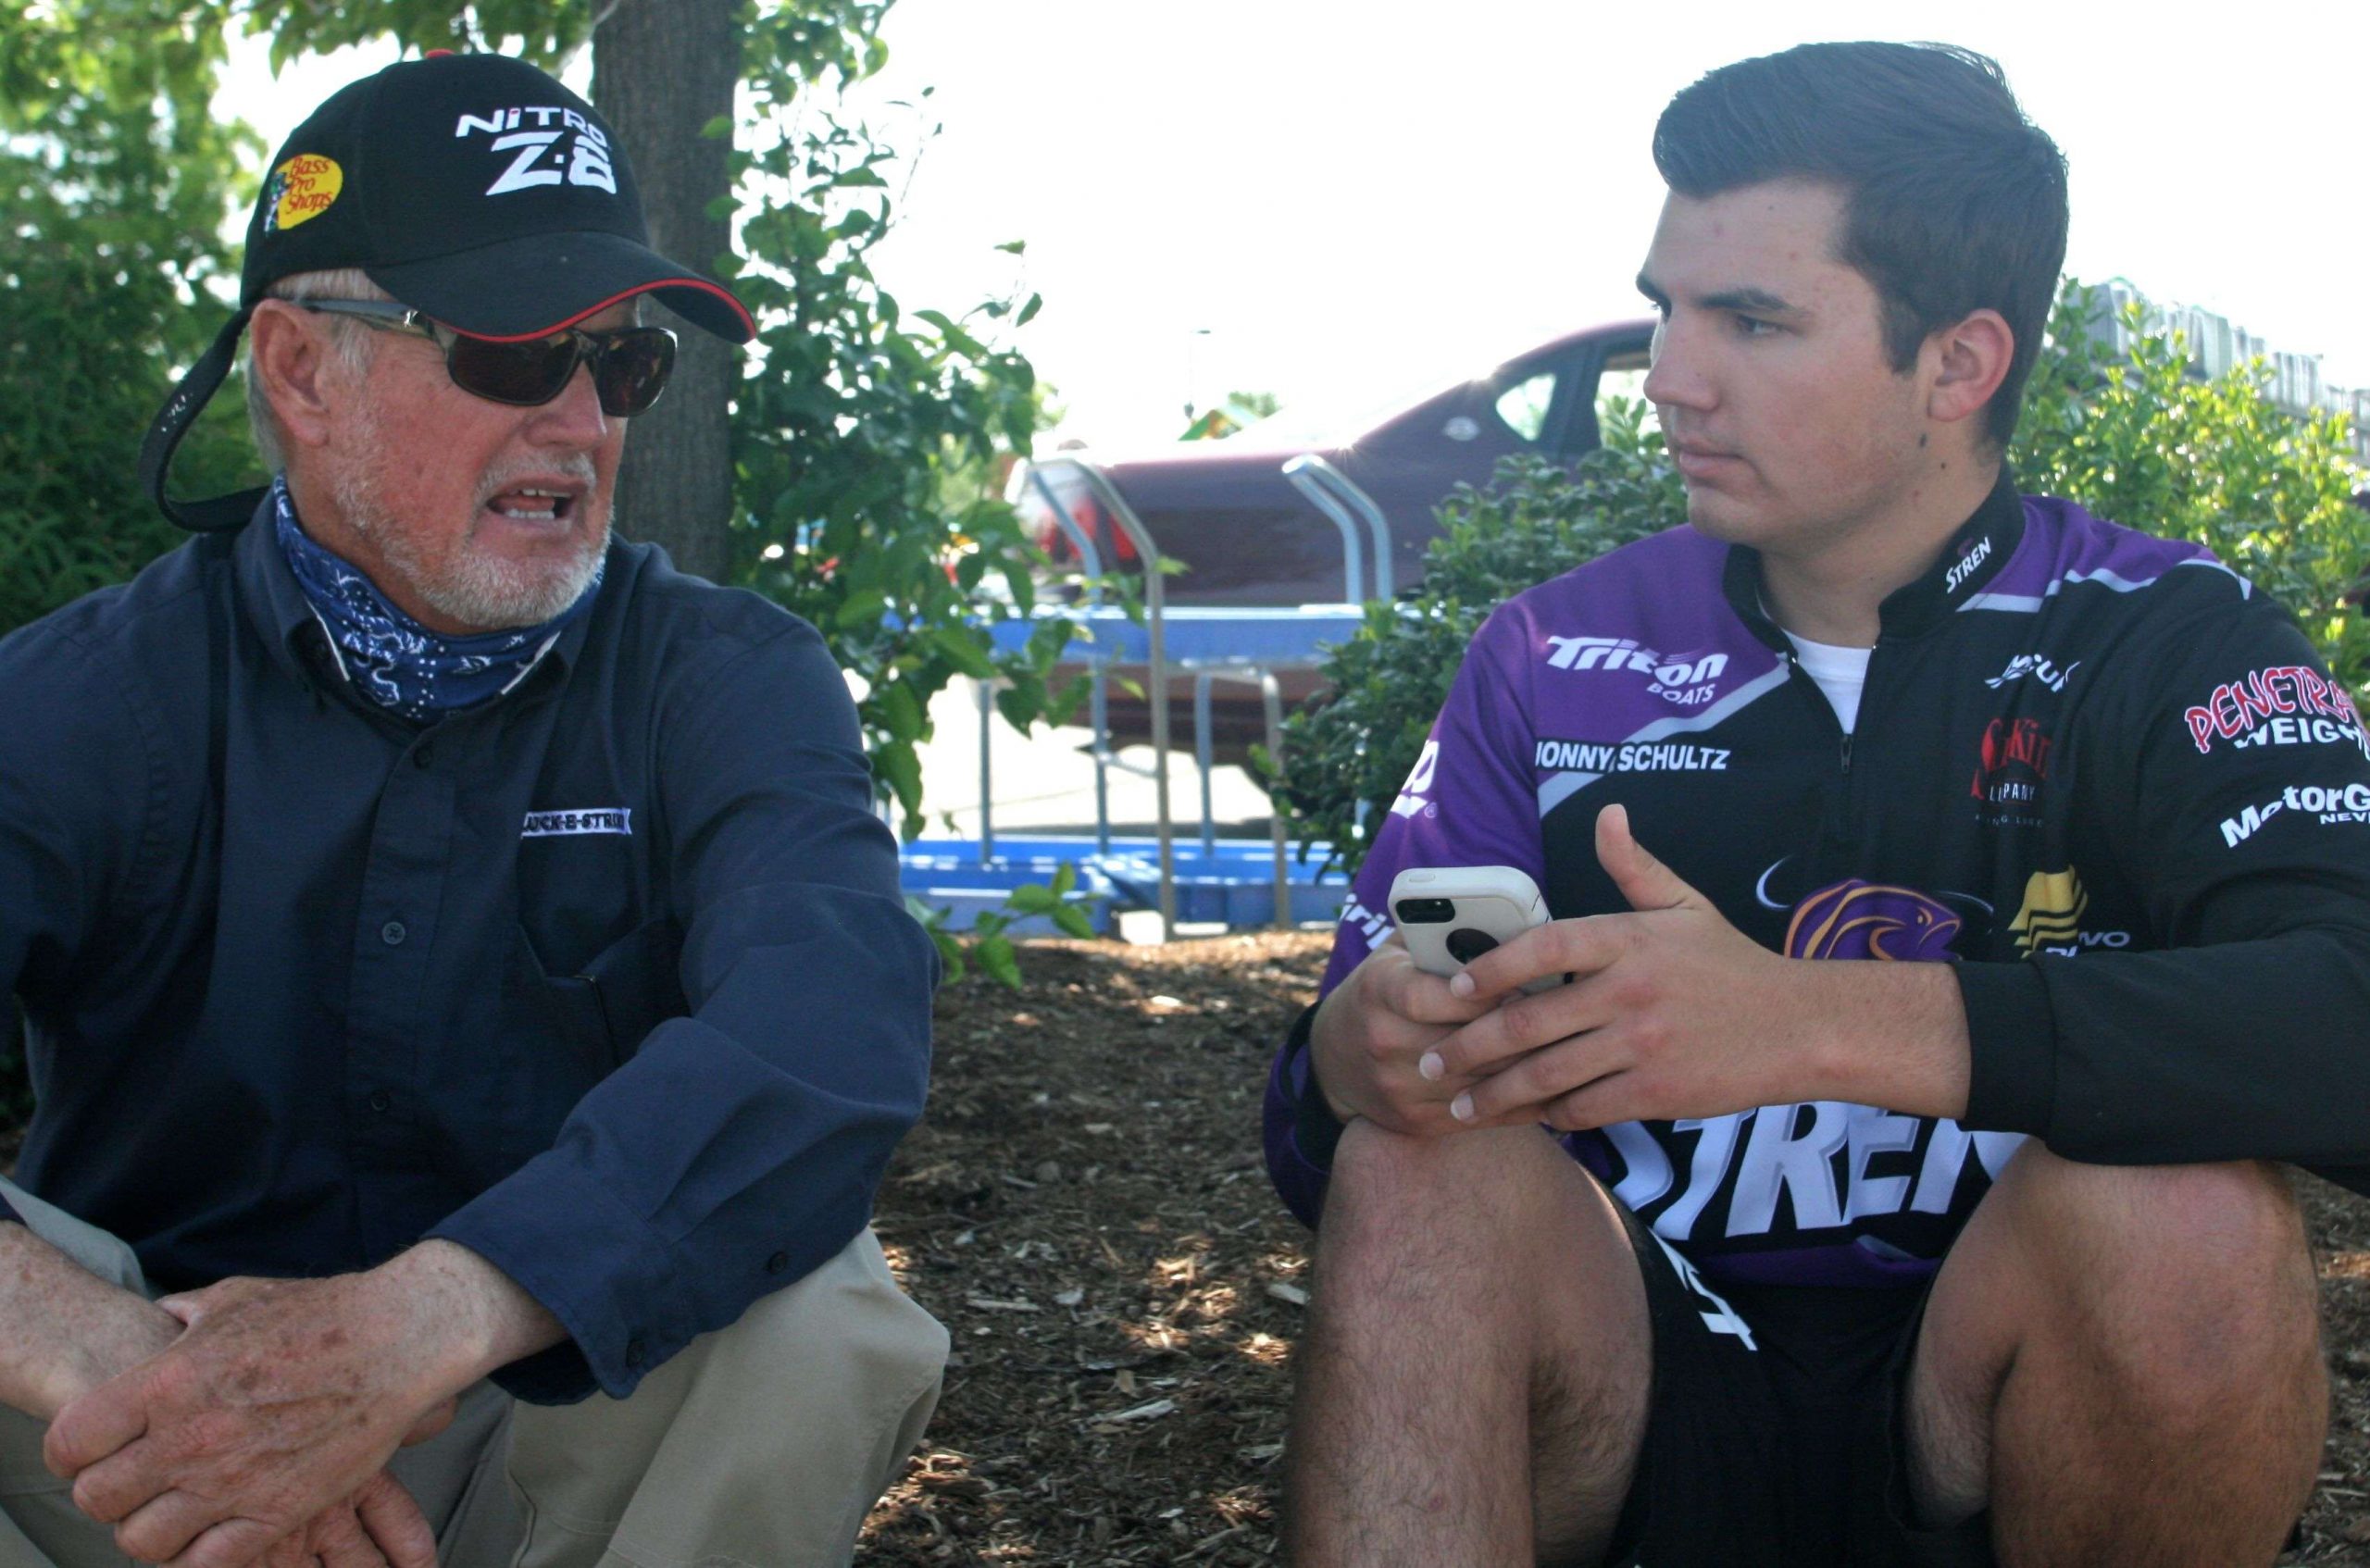 Jonny Schultz (right) was part of the University of Arkansas bass fishing team that helped provide instruction. And Schultz got some fishing tips as well, from one of the all-time greats in the bass fishing world, Rick Clunn. 